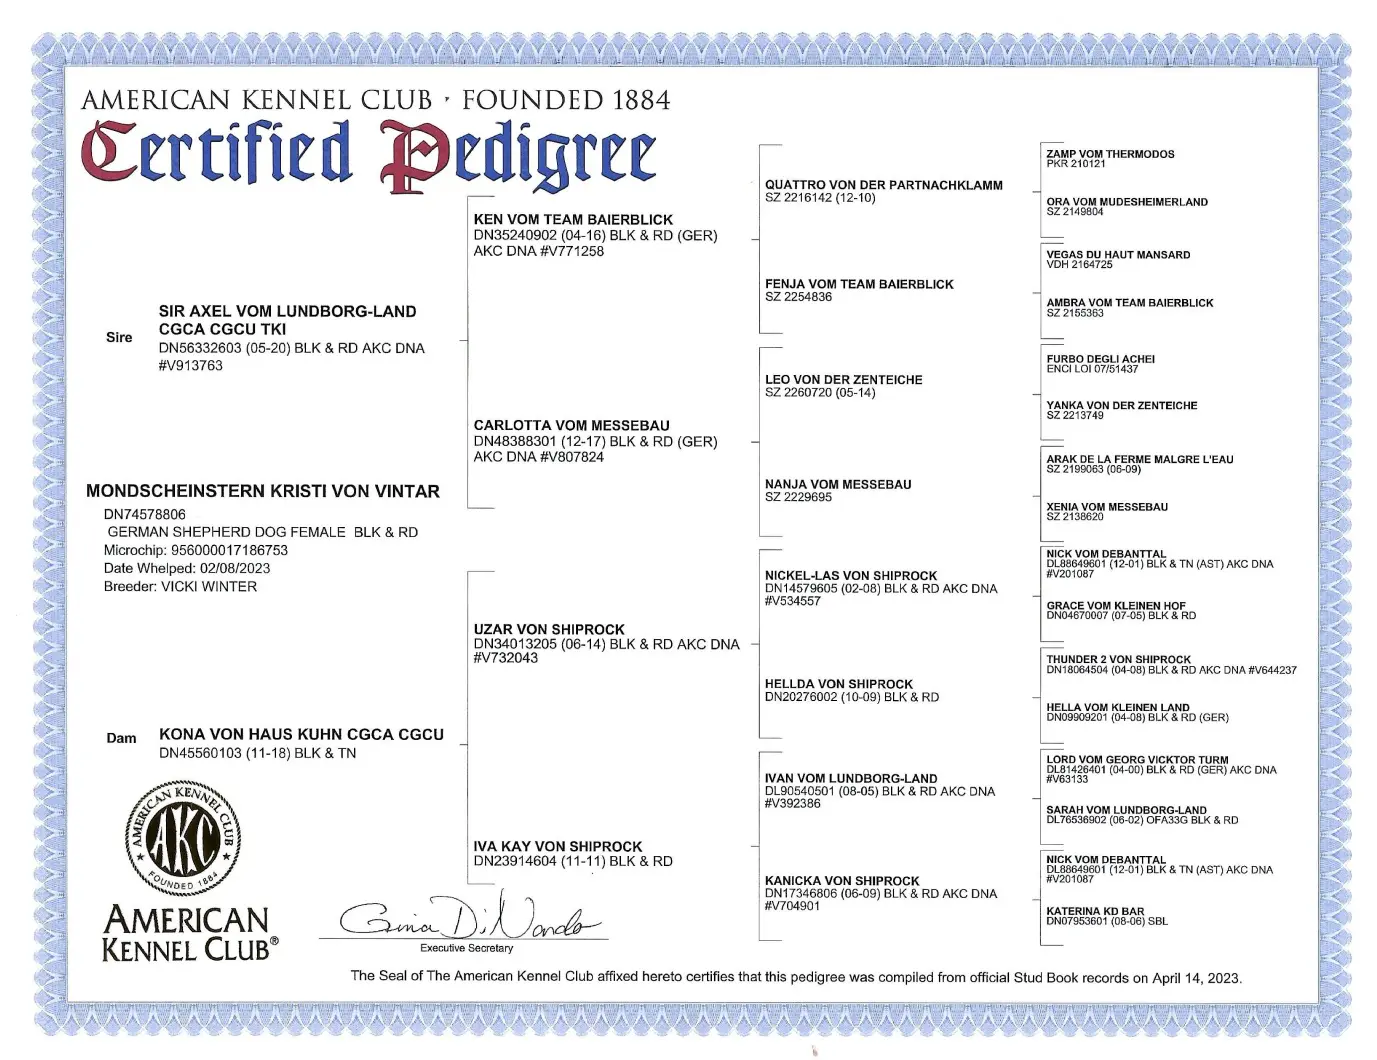 A certificate of authenticity for an american kennel club dog.